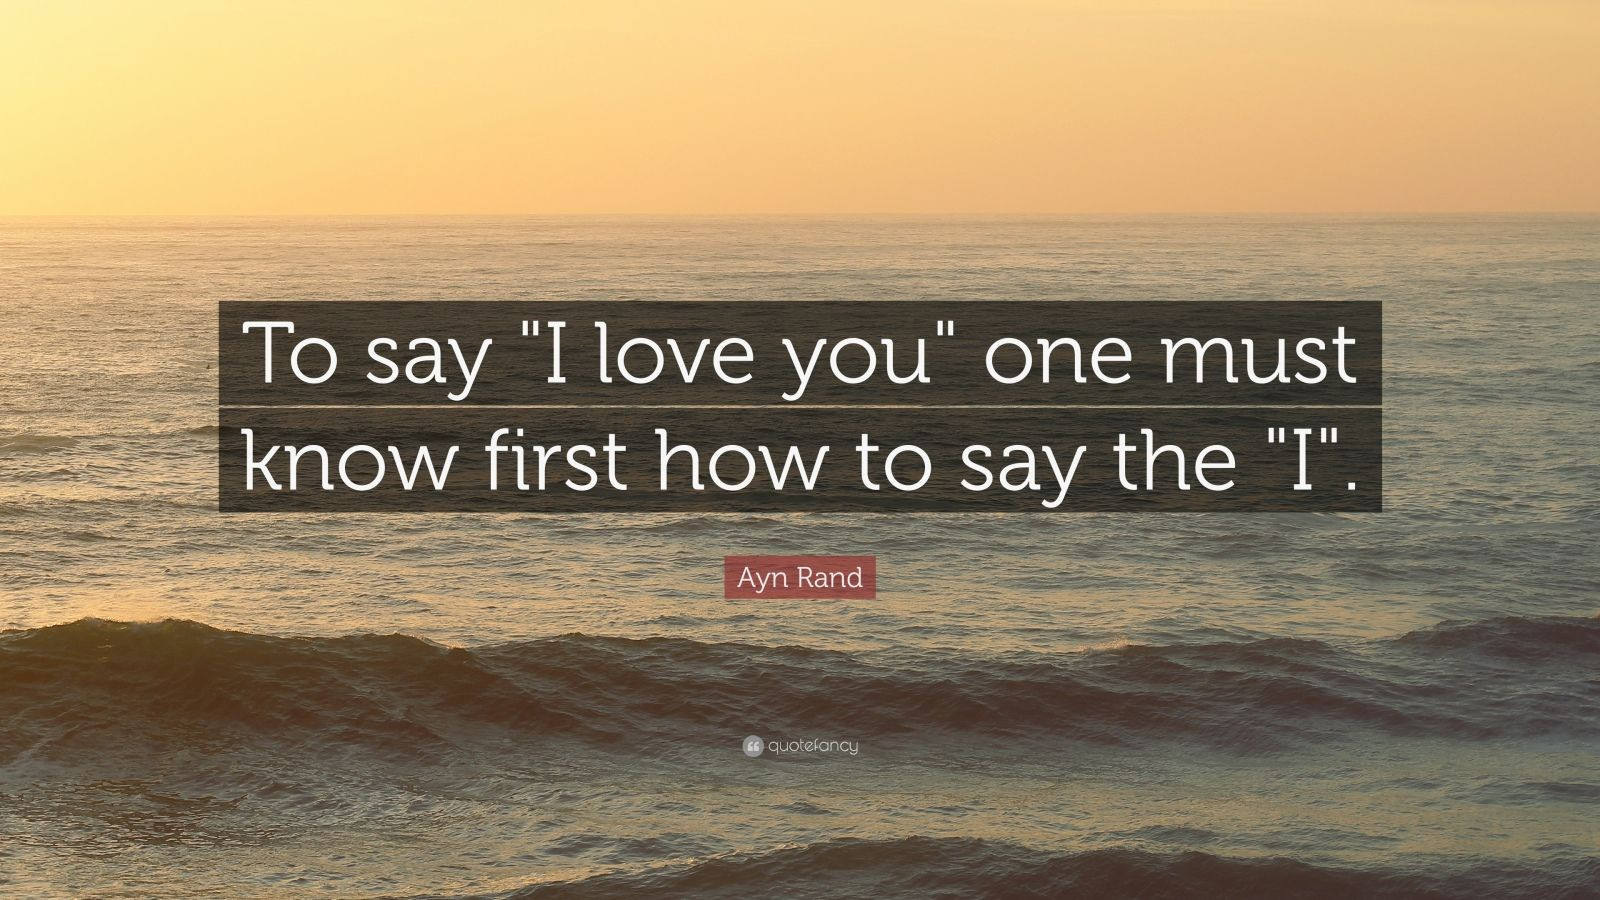 Ayn Rand Love Quotes
 Ayn Rand Quote “To say "I love you" one must know first